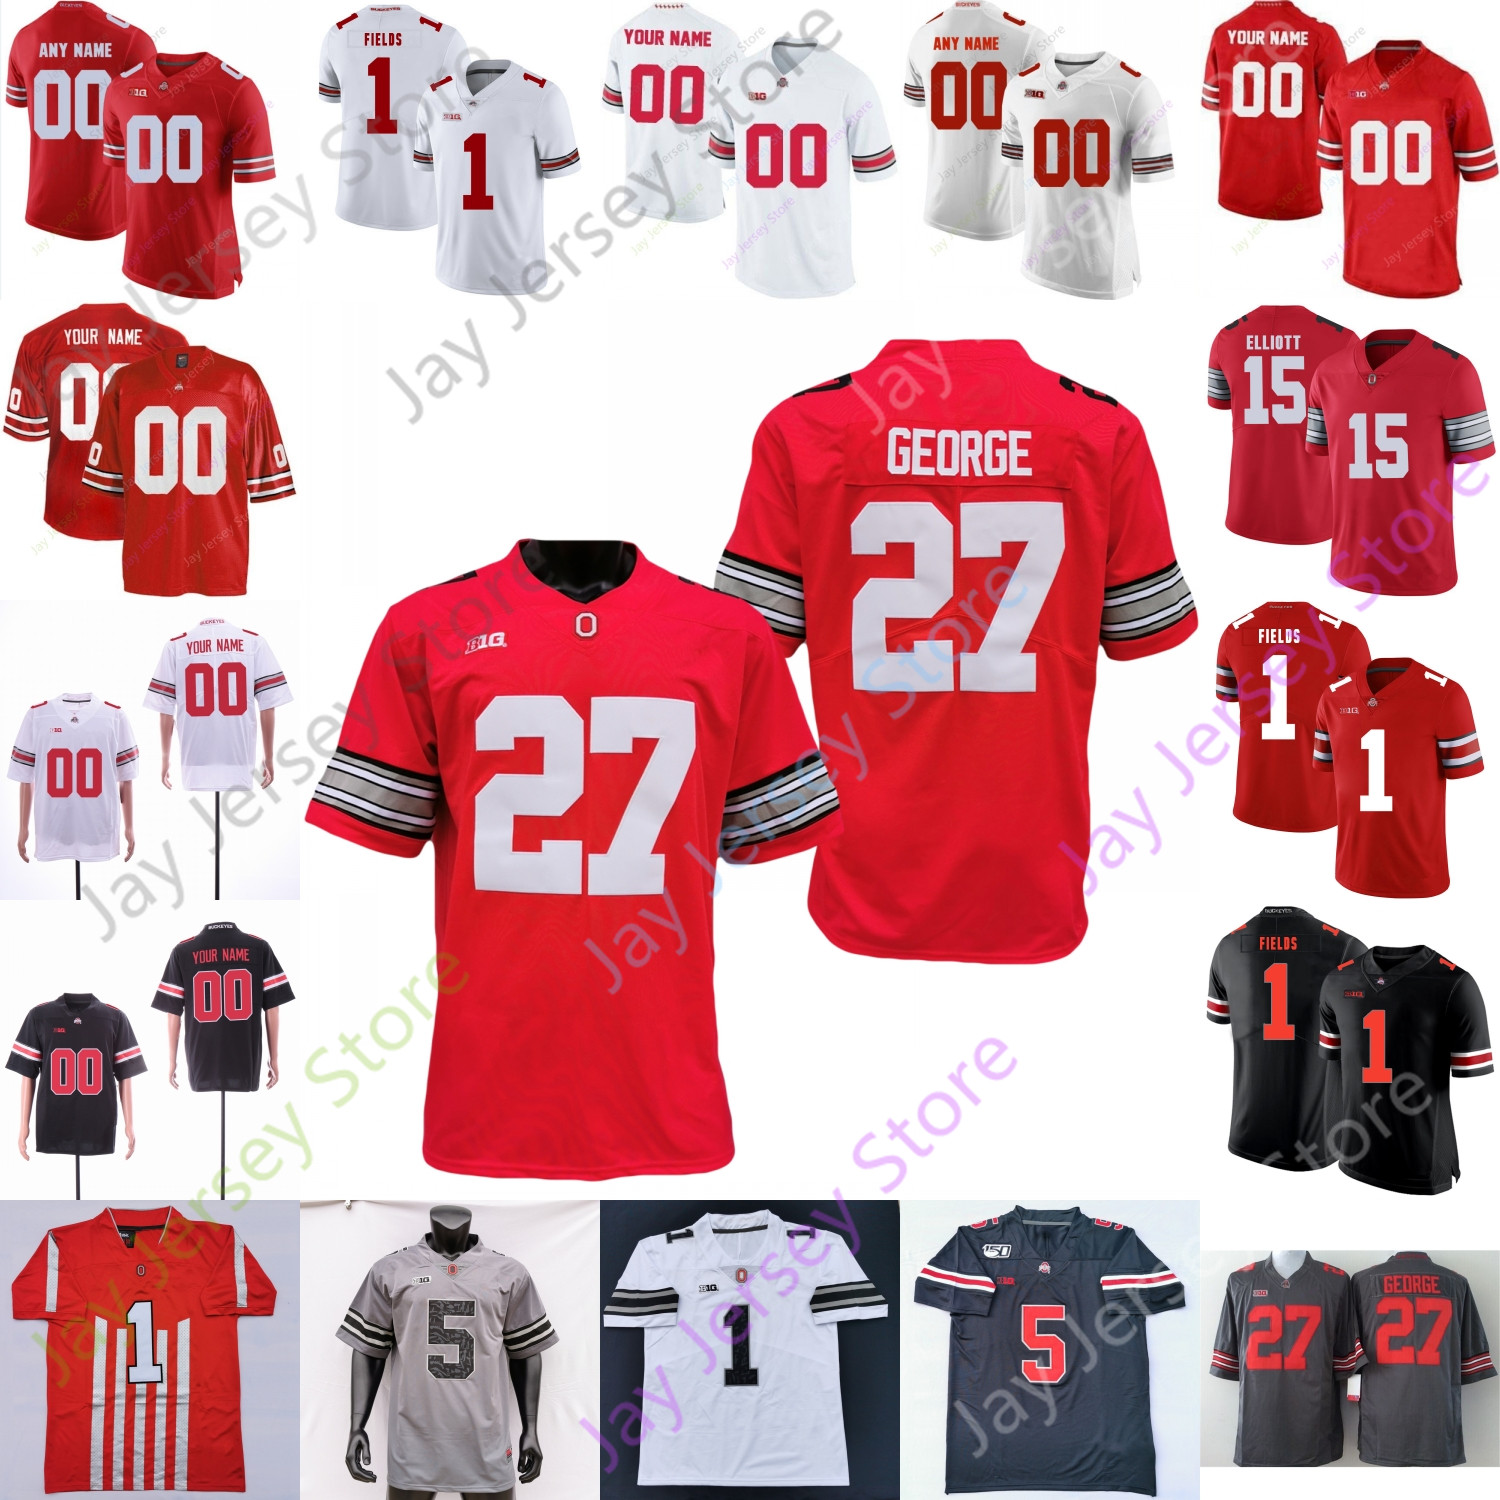 Wholesale Best Ohio State Jerseys for 